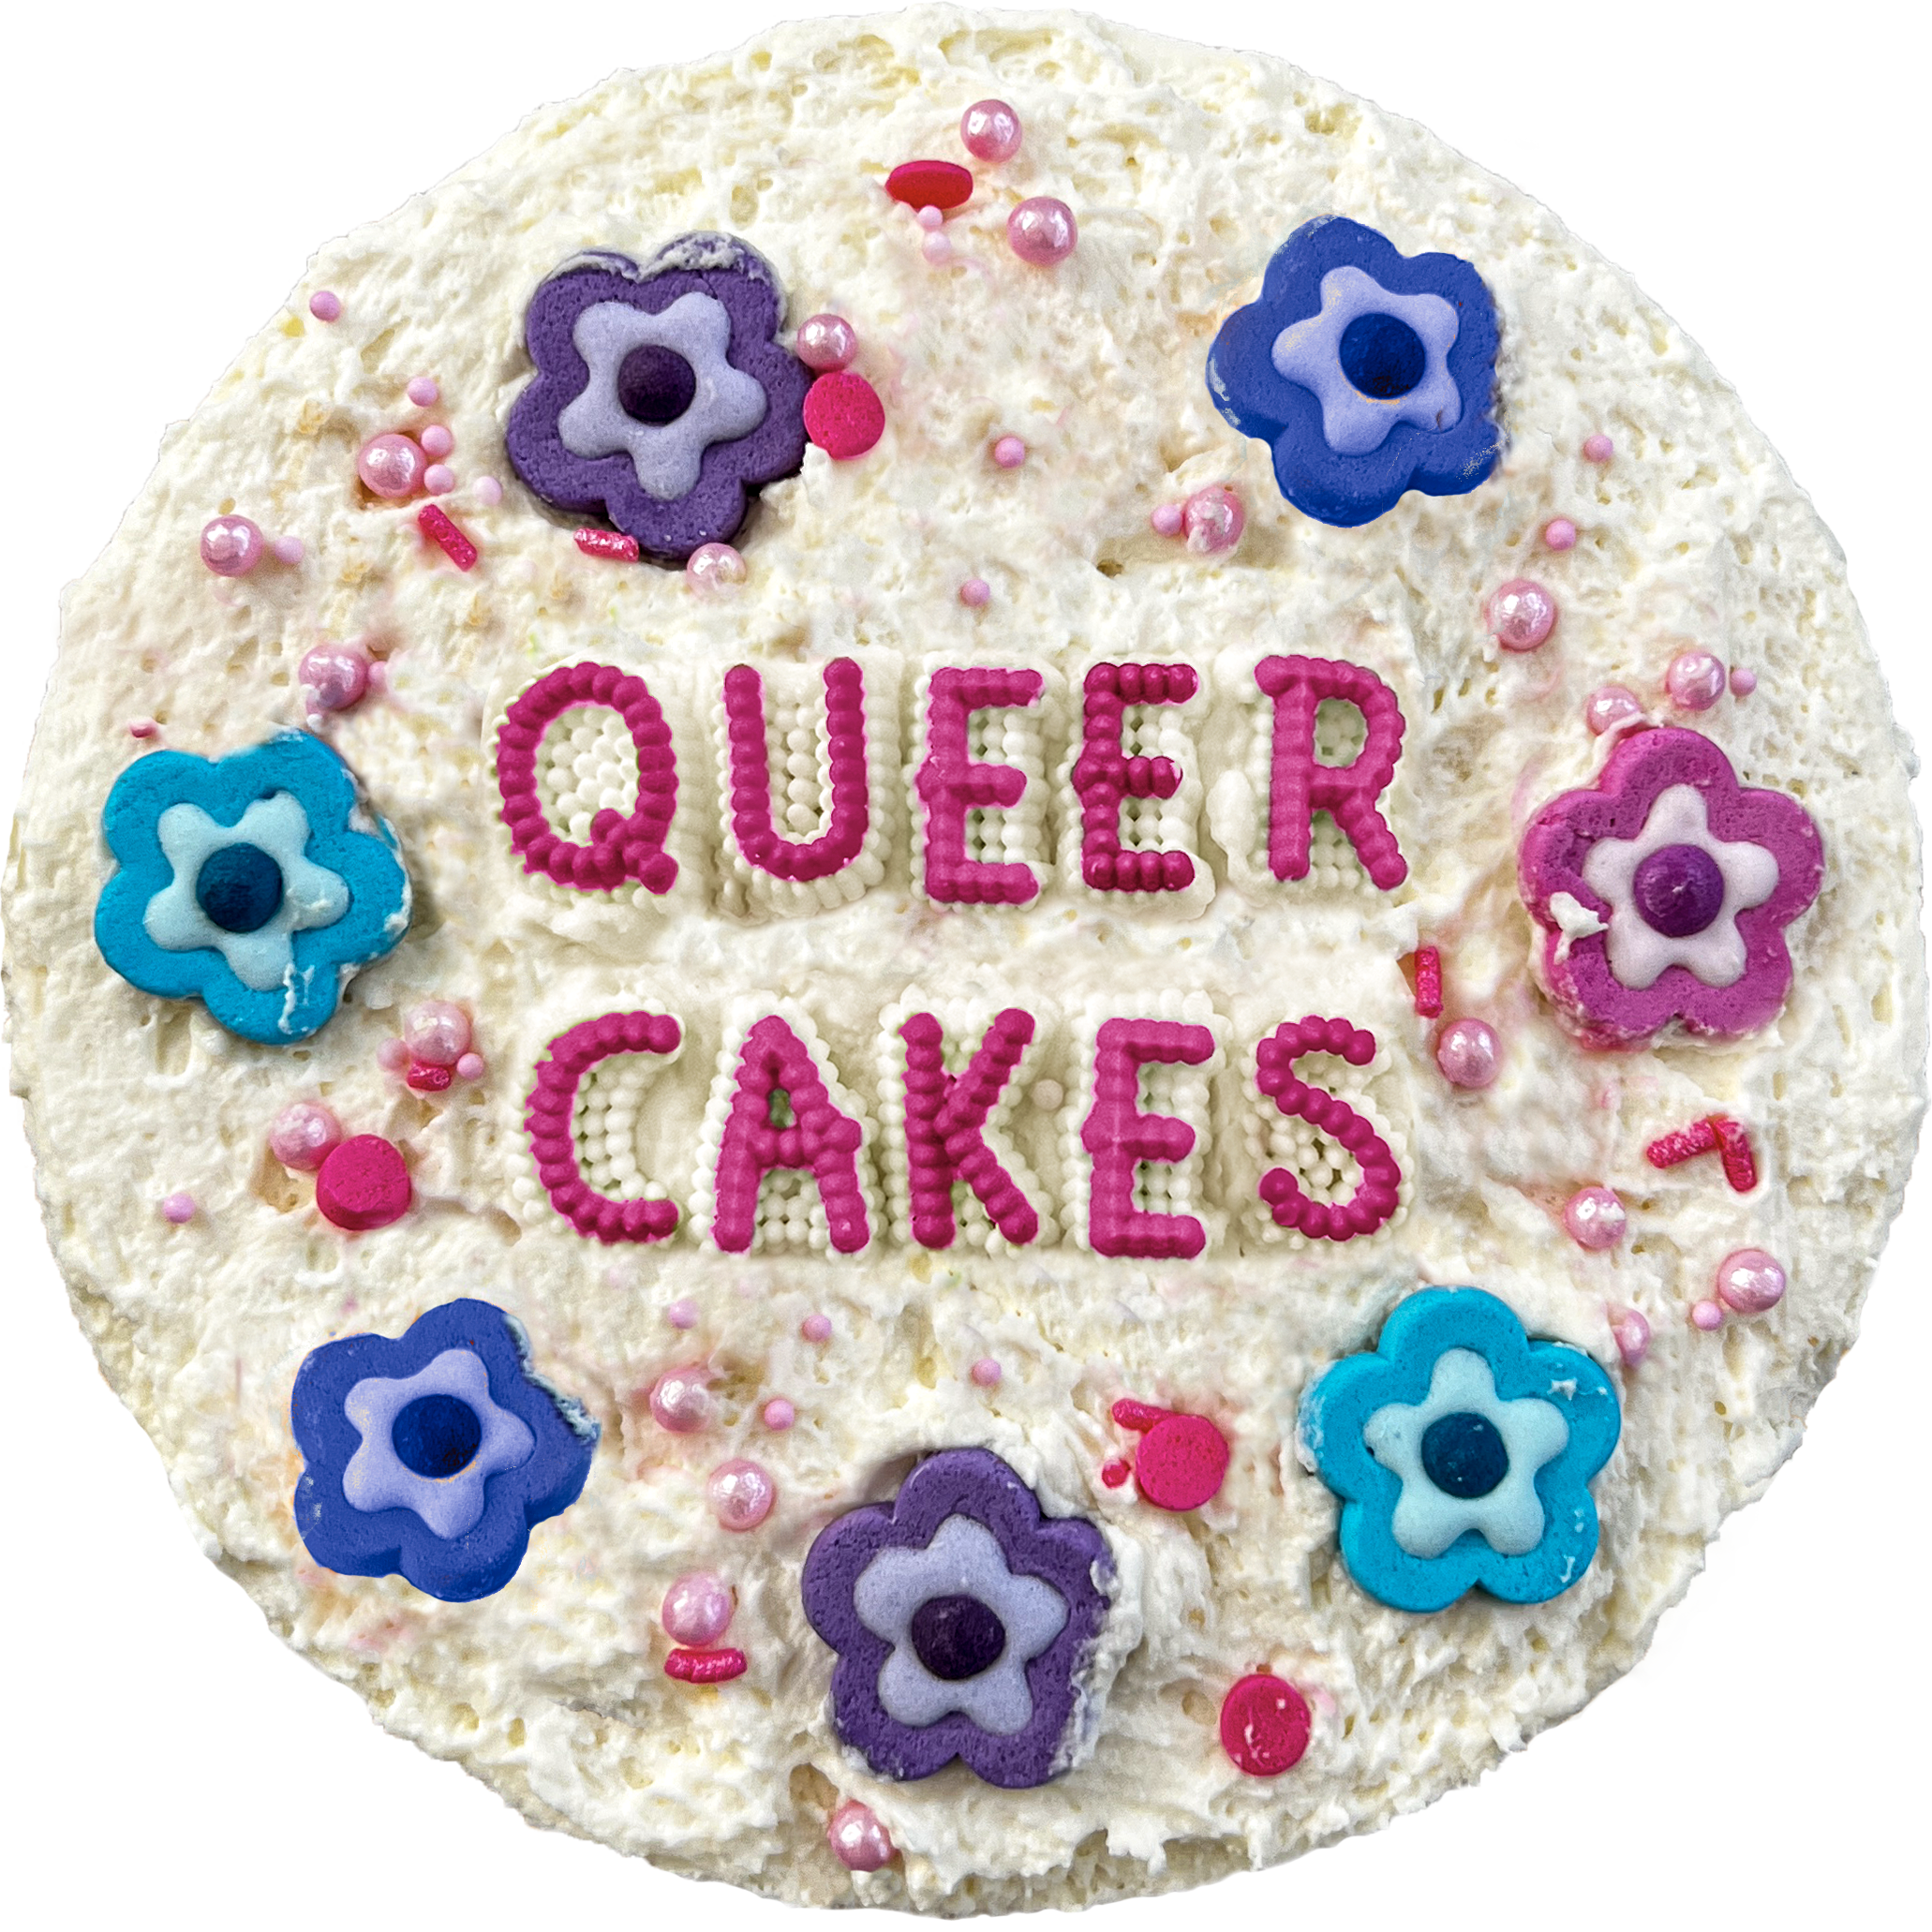 A round cake from above with fluffy white icing and candy flowers and letters spelling out queer cakes.